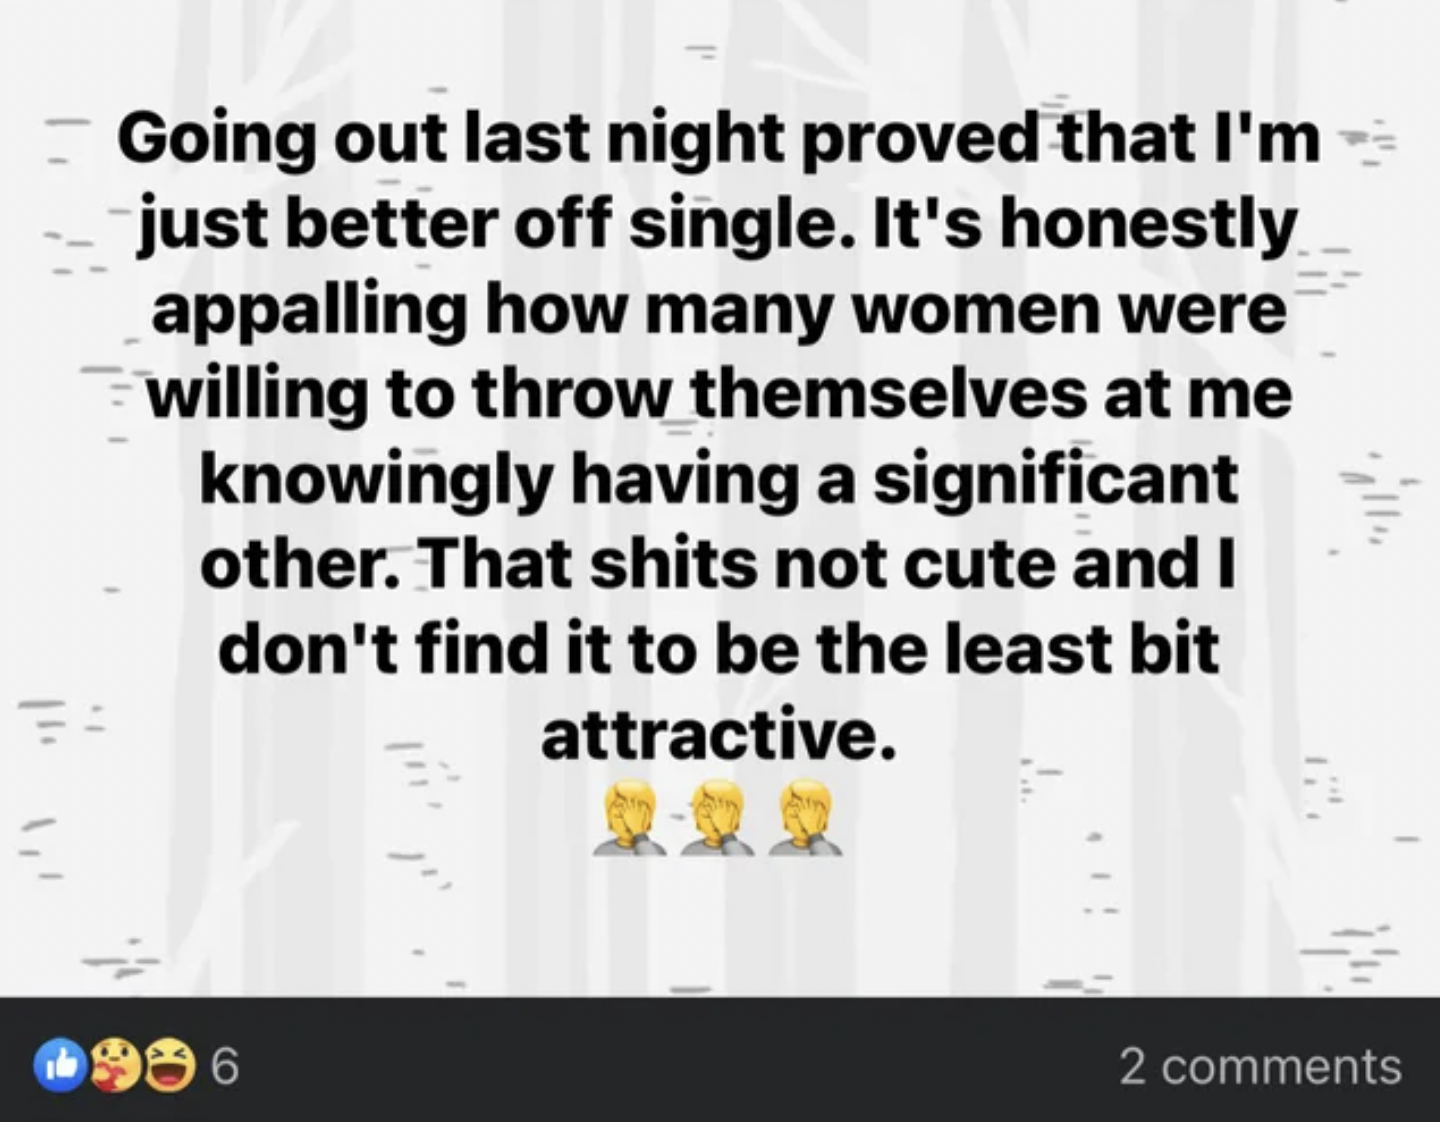 document - Going out last night proved that I'm just better off single. It's honestly appalling how many women were willing to throw themselves at me knowingly having a significant other. That shits not cute and I don't find it to be the least bit attract